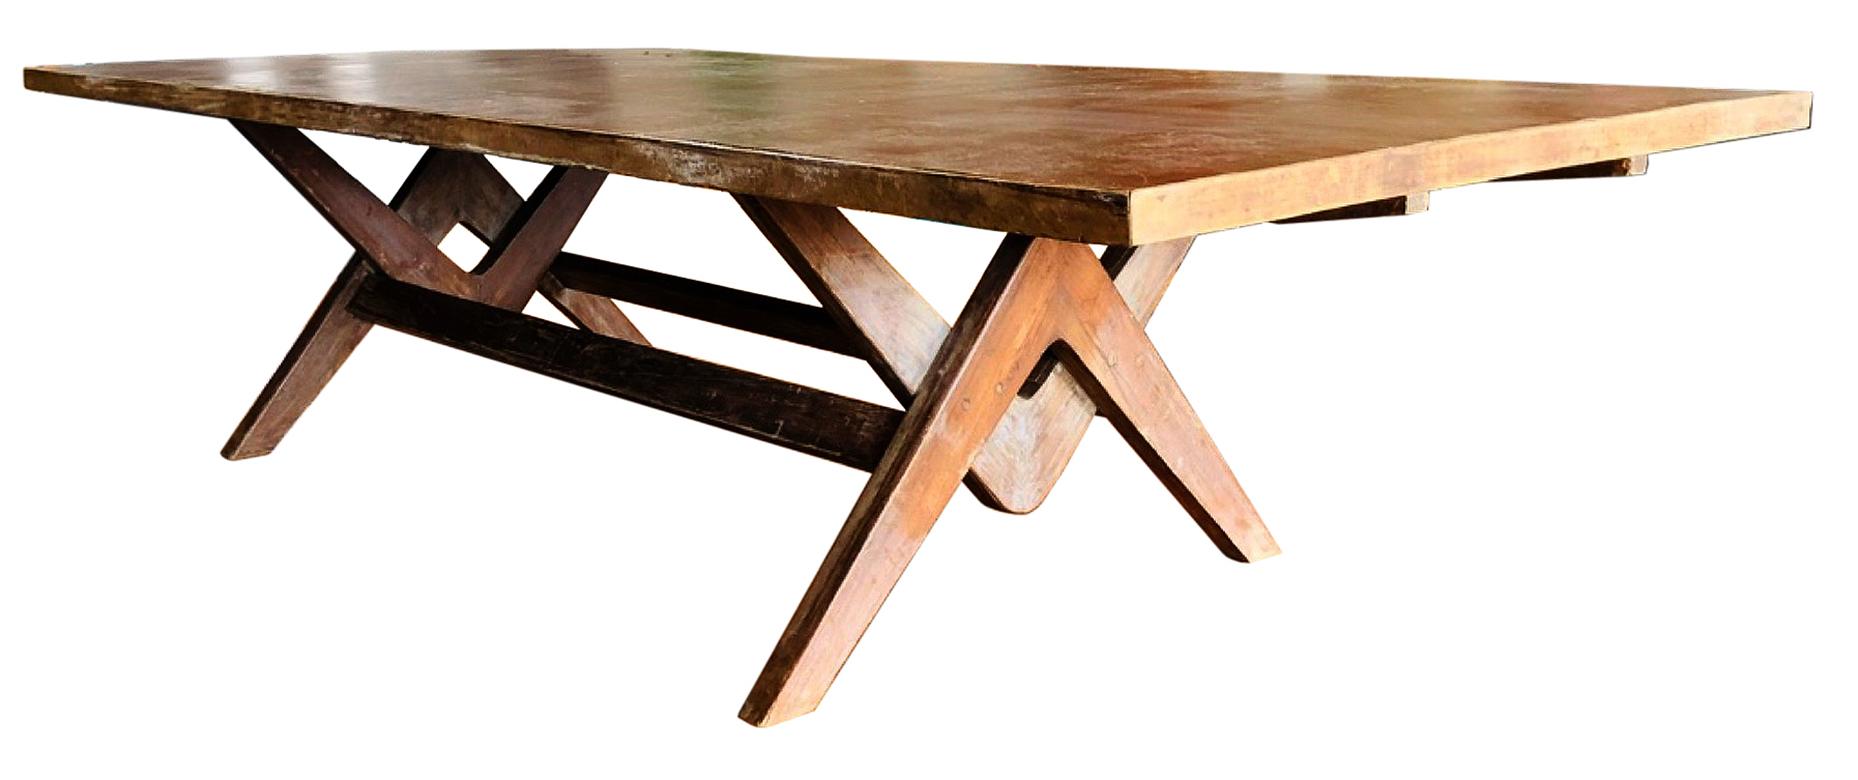 A truly rare find. A 10' long committee table for the Chandigarh project designed by Pierre Jeanneret.
This example is solid teak construction. A completely untouched and correct example.
An exceptionally important piece of design History.